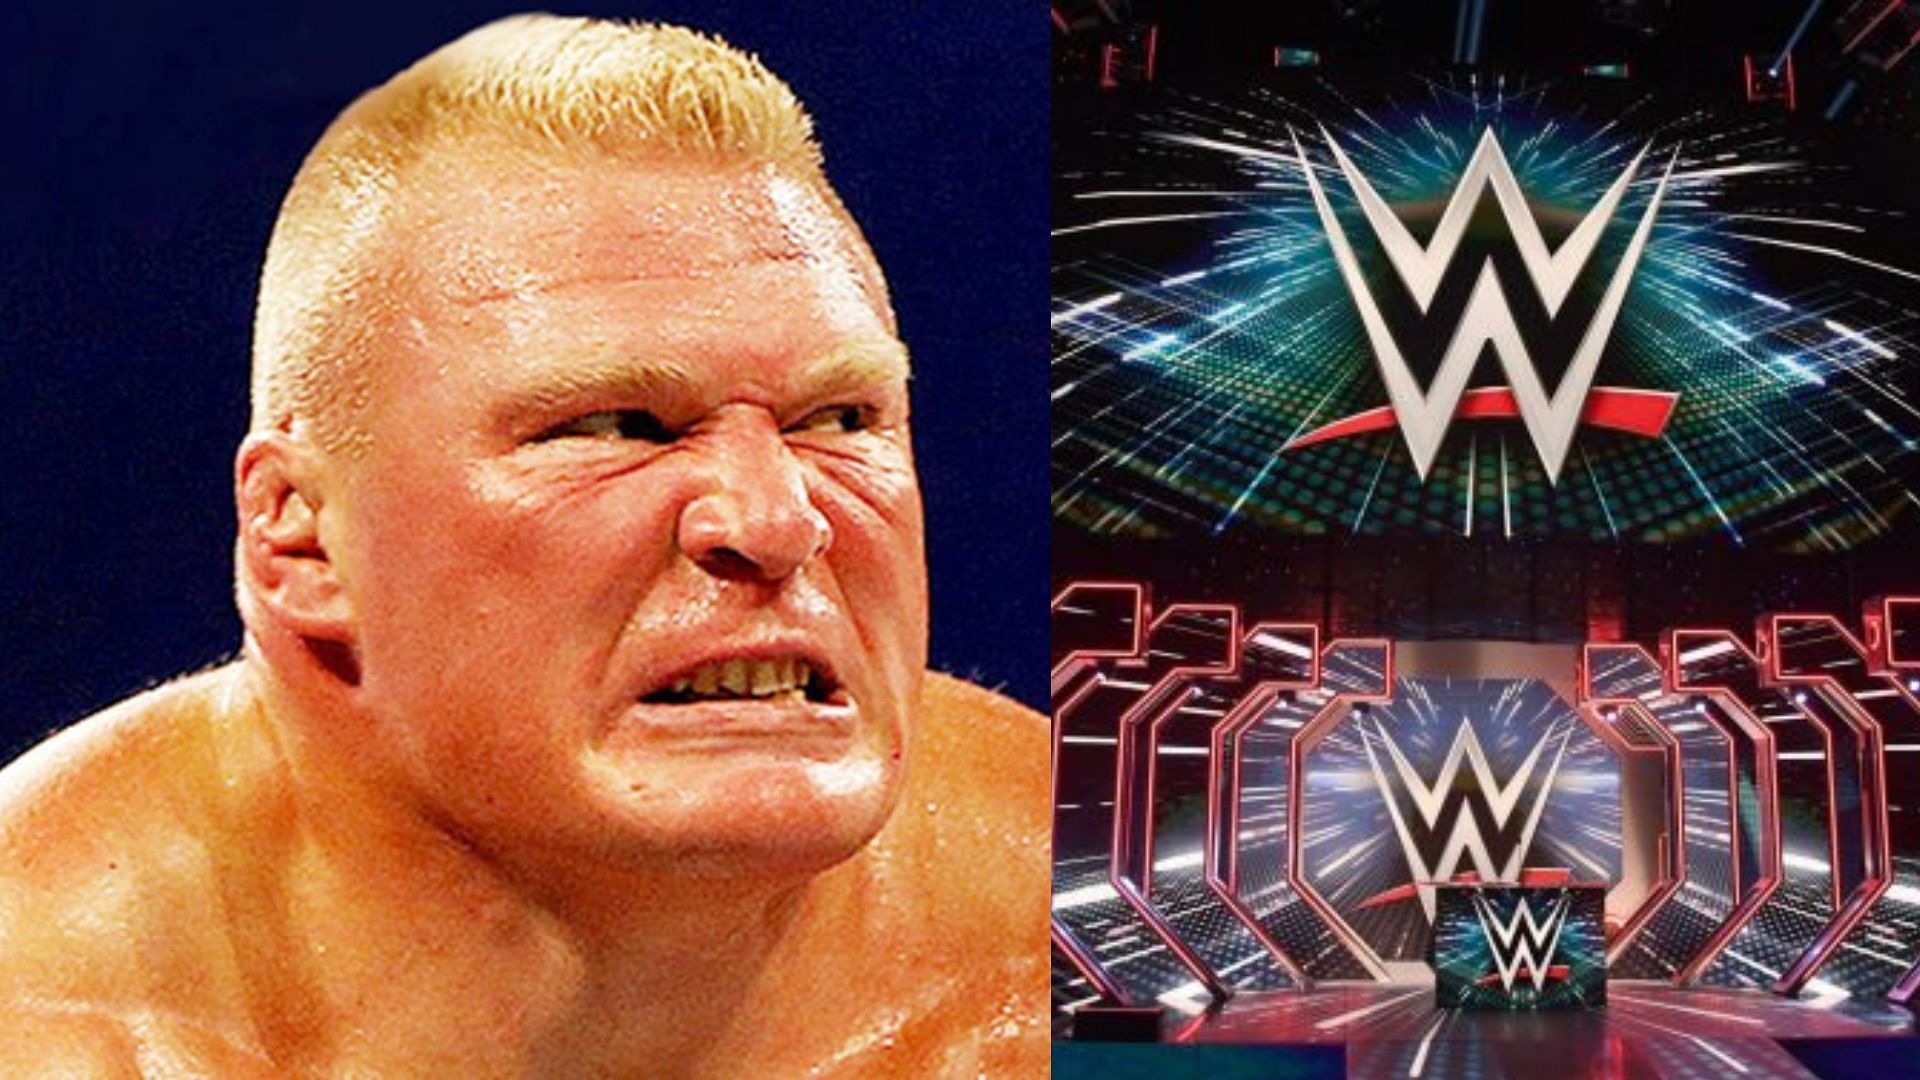 Brock Lesnar is a former 7 time WWE Champion